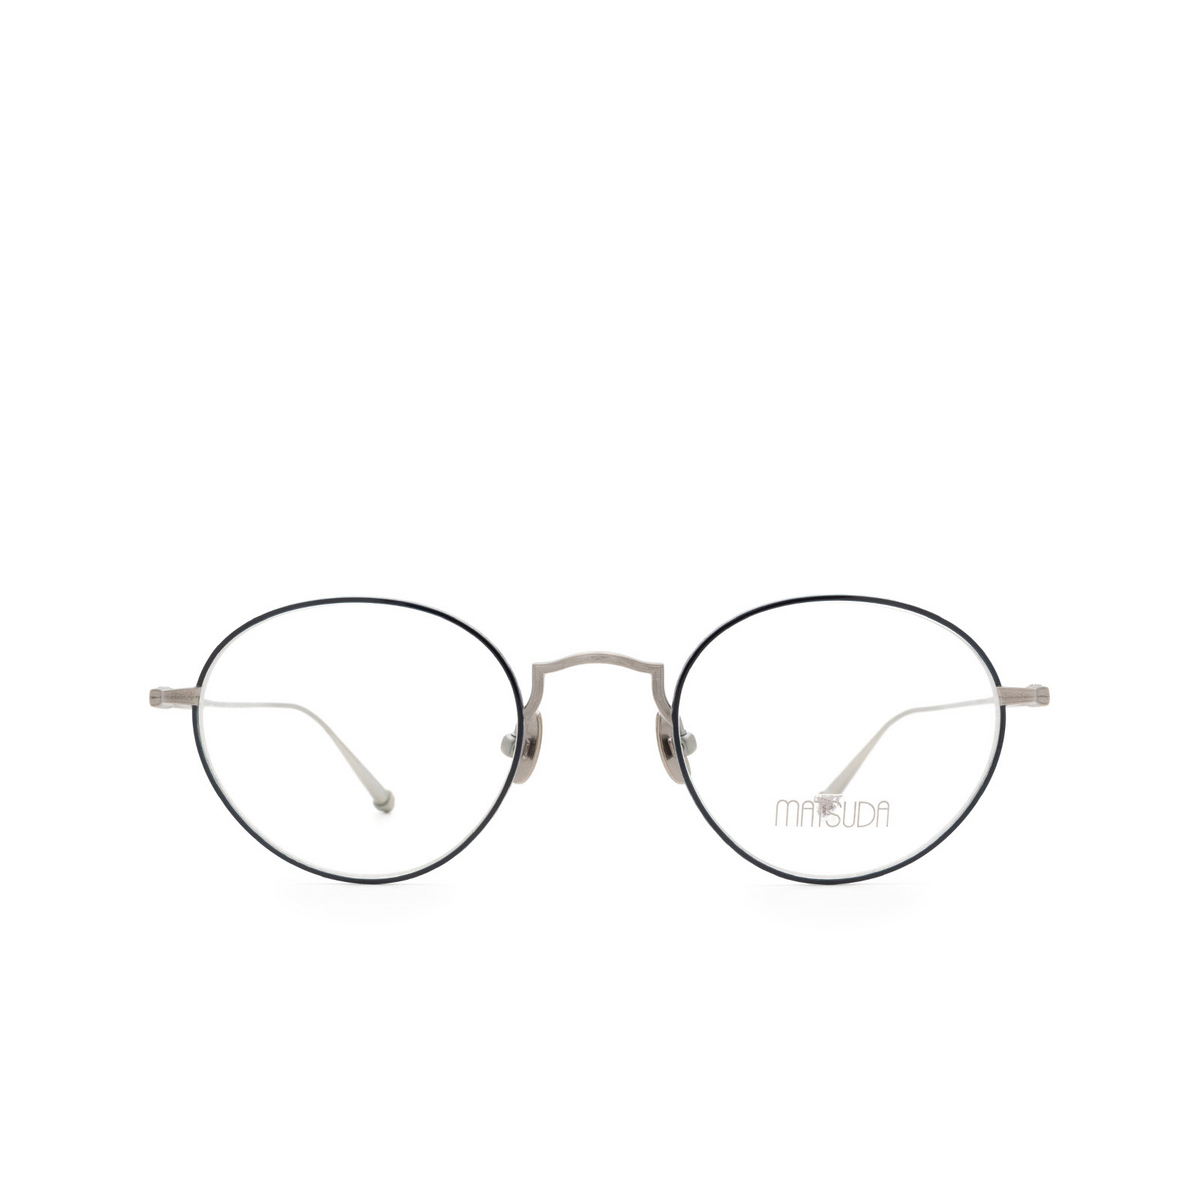 Matsuda® Round Eyeglasses: M3103 color Antique Silver As - front view.